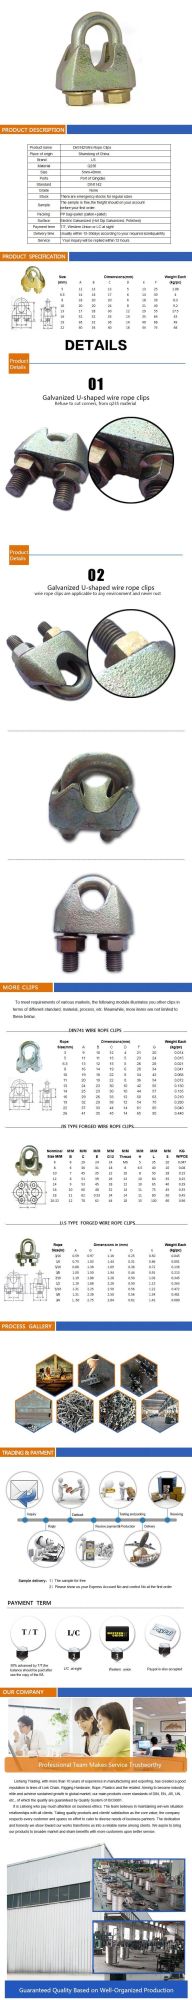 Galvanized Malleable Adjustable DIN 1142 Wire Rope Clip